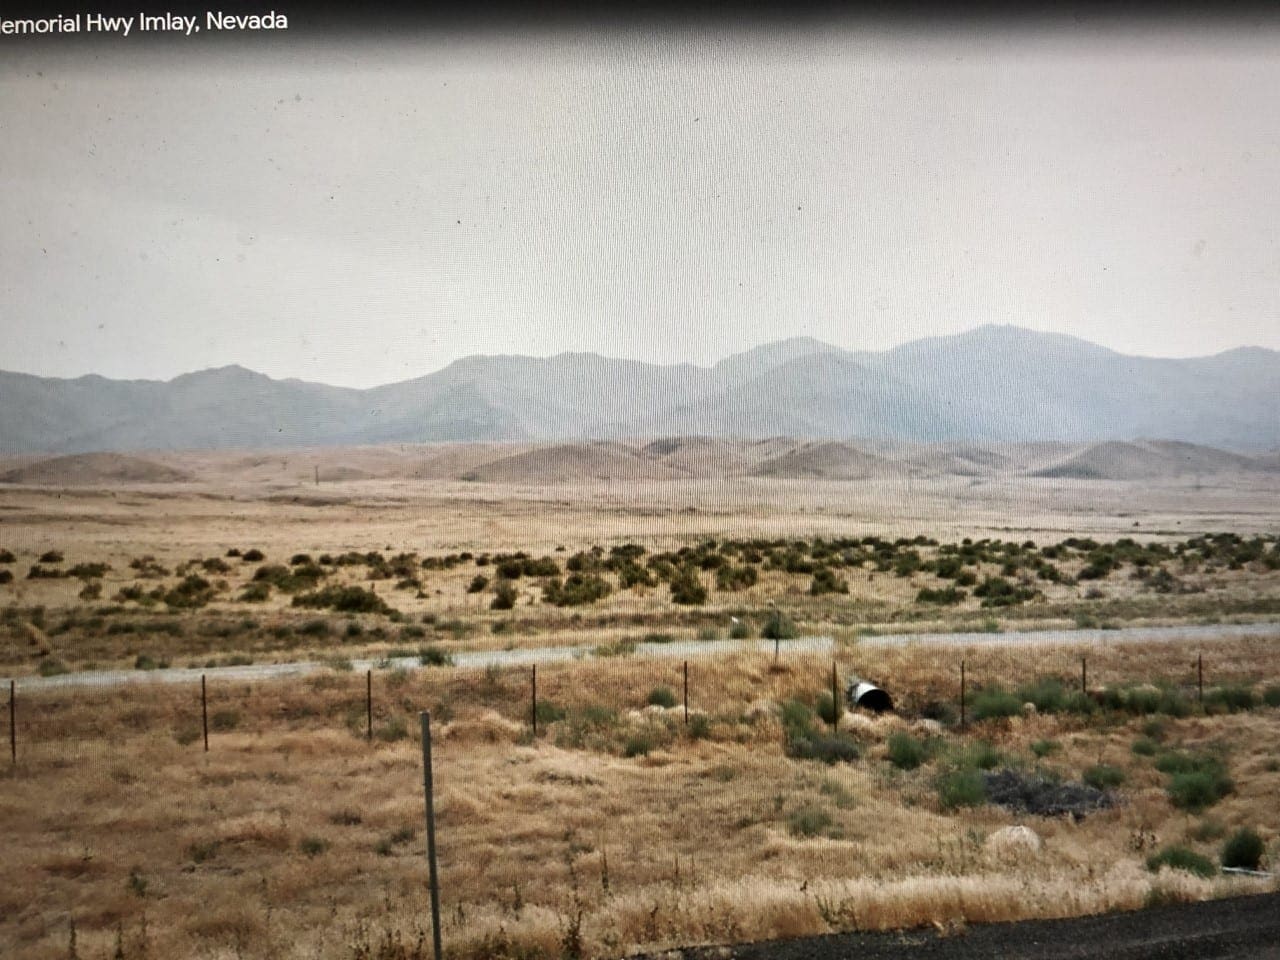 1.54 Acre Lot with Interstate 80 Frontage in Imlay, Nevada. Zoned AGRICULTURE – MINING – RECREATION. photo 11